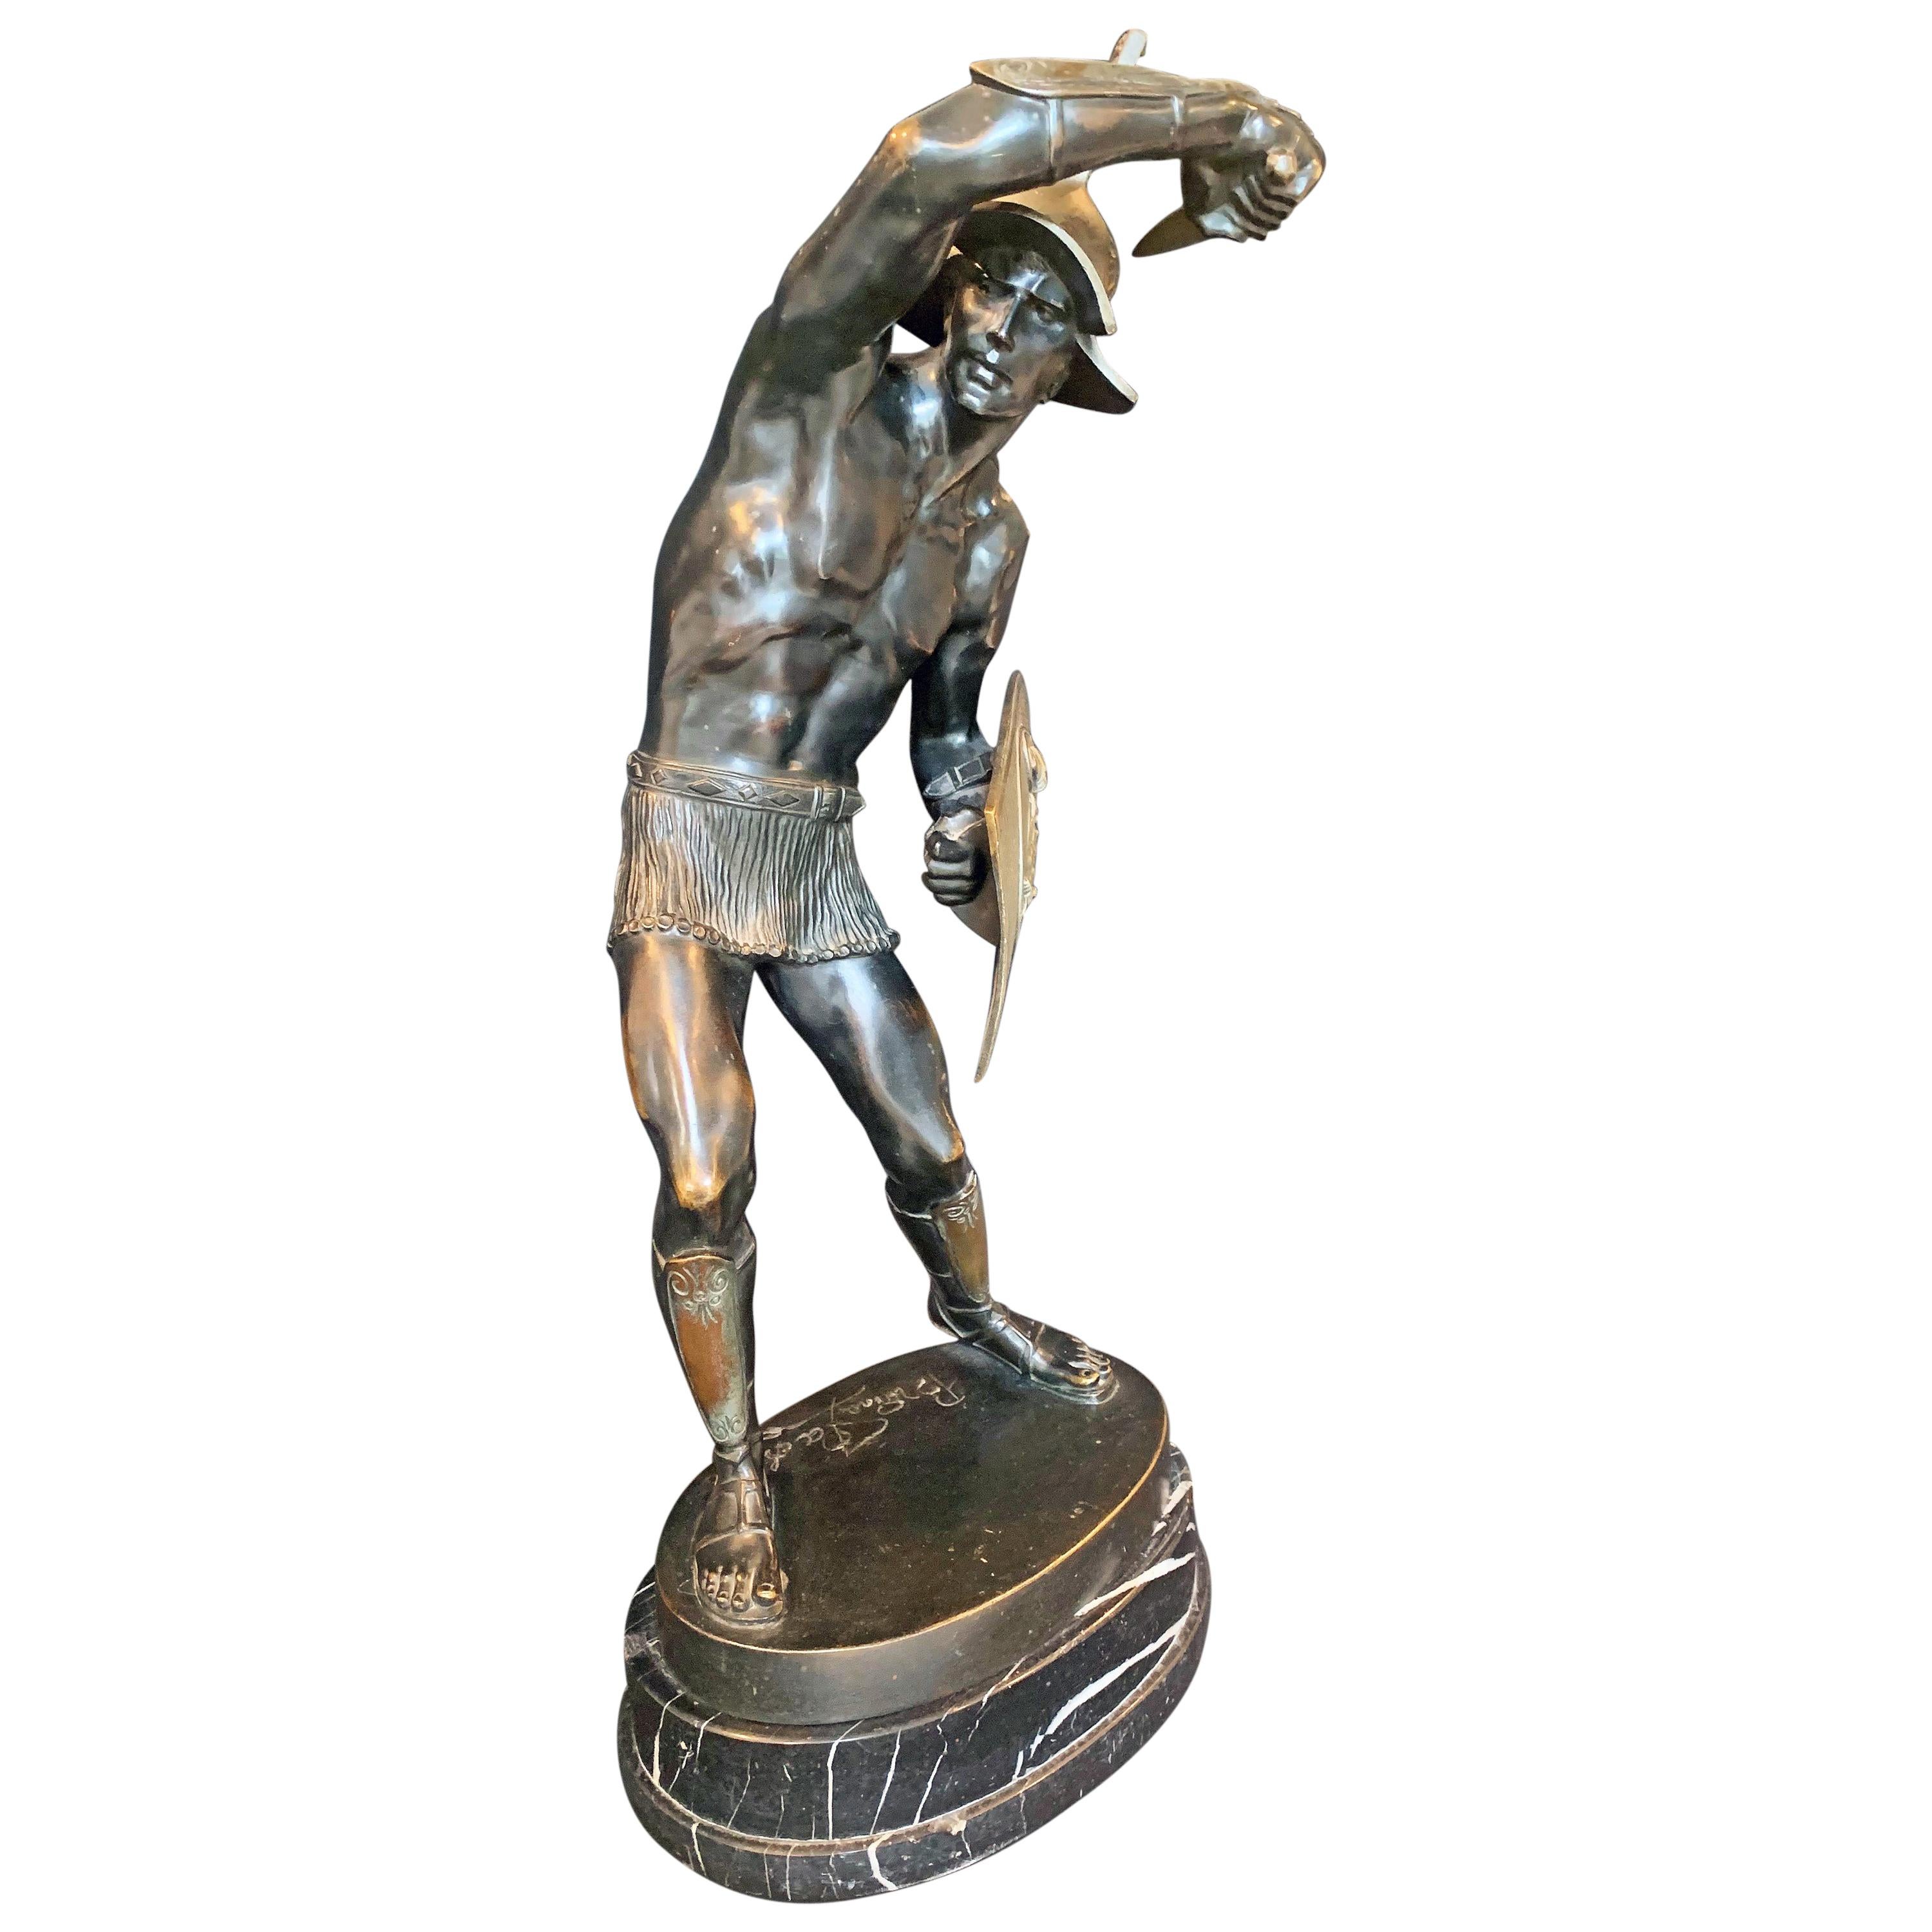 "Gladiator with Shield and Helmet," Rare, Large Bronze Sculpture with Nude Male